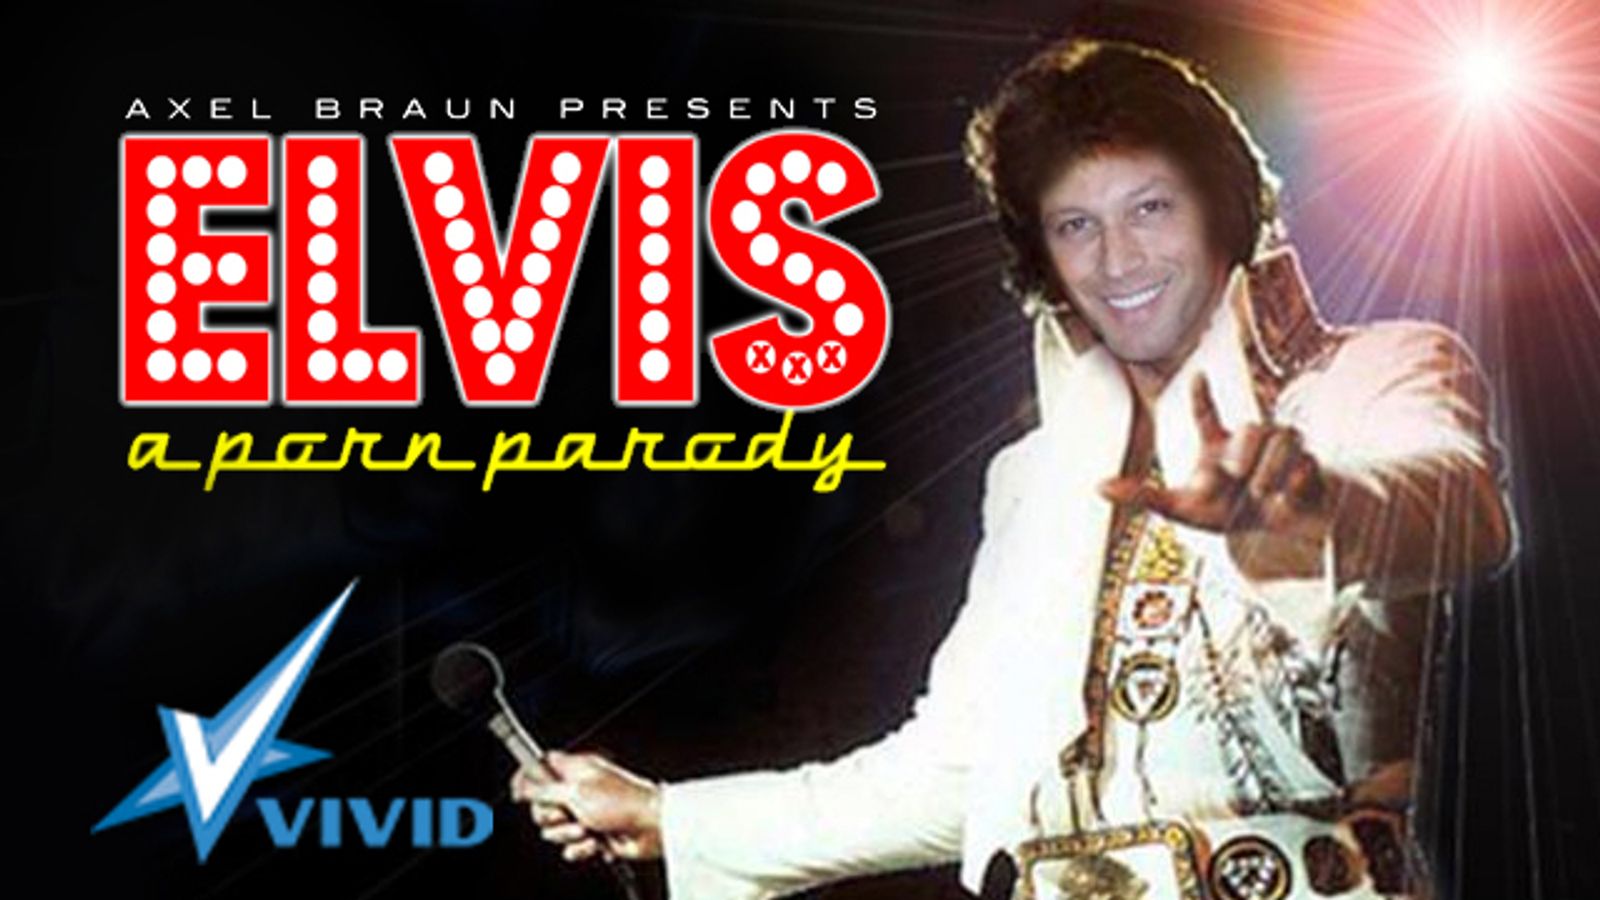 Axel Braun, Vivid Get All Shook Up for Musical Spoofs in '11